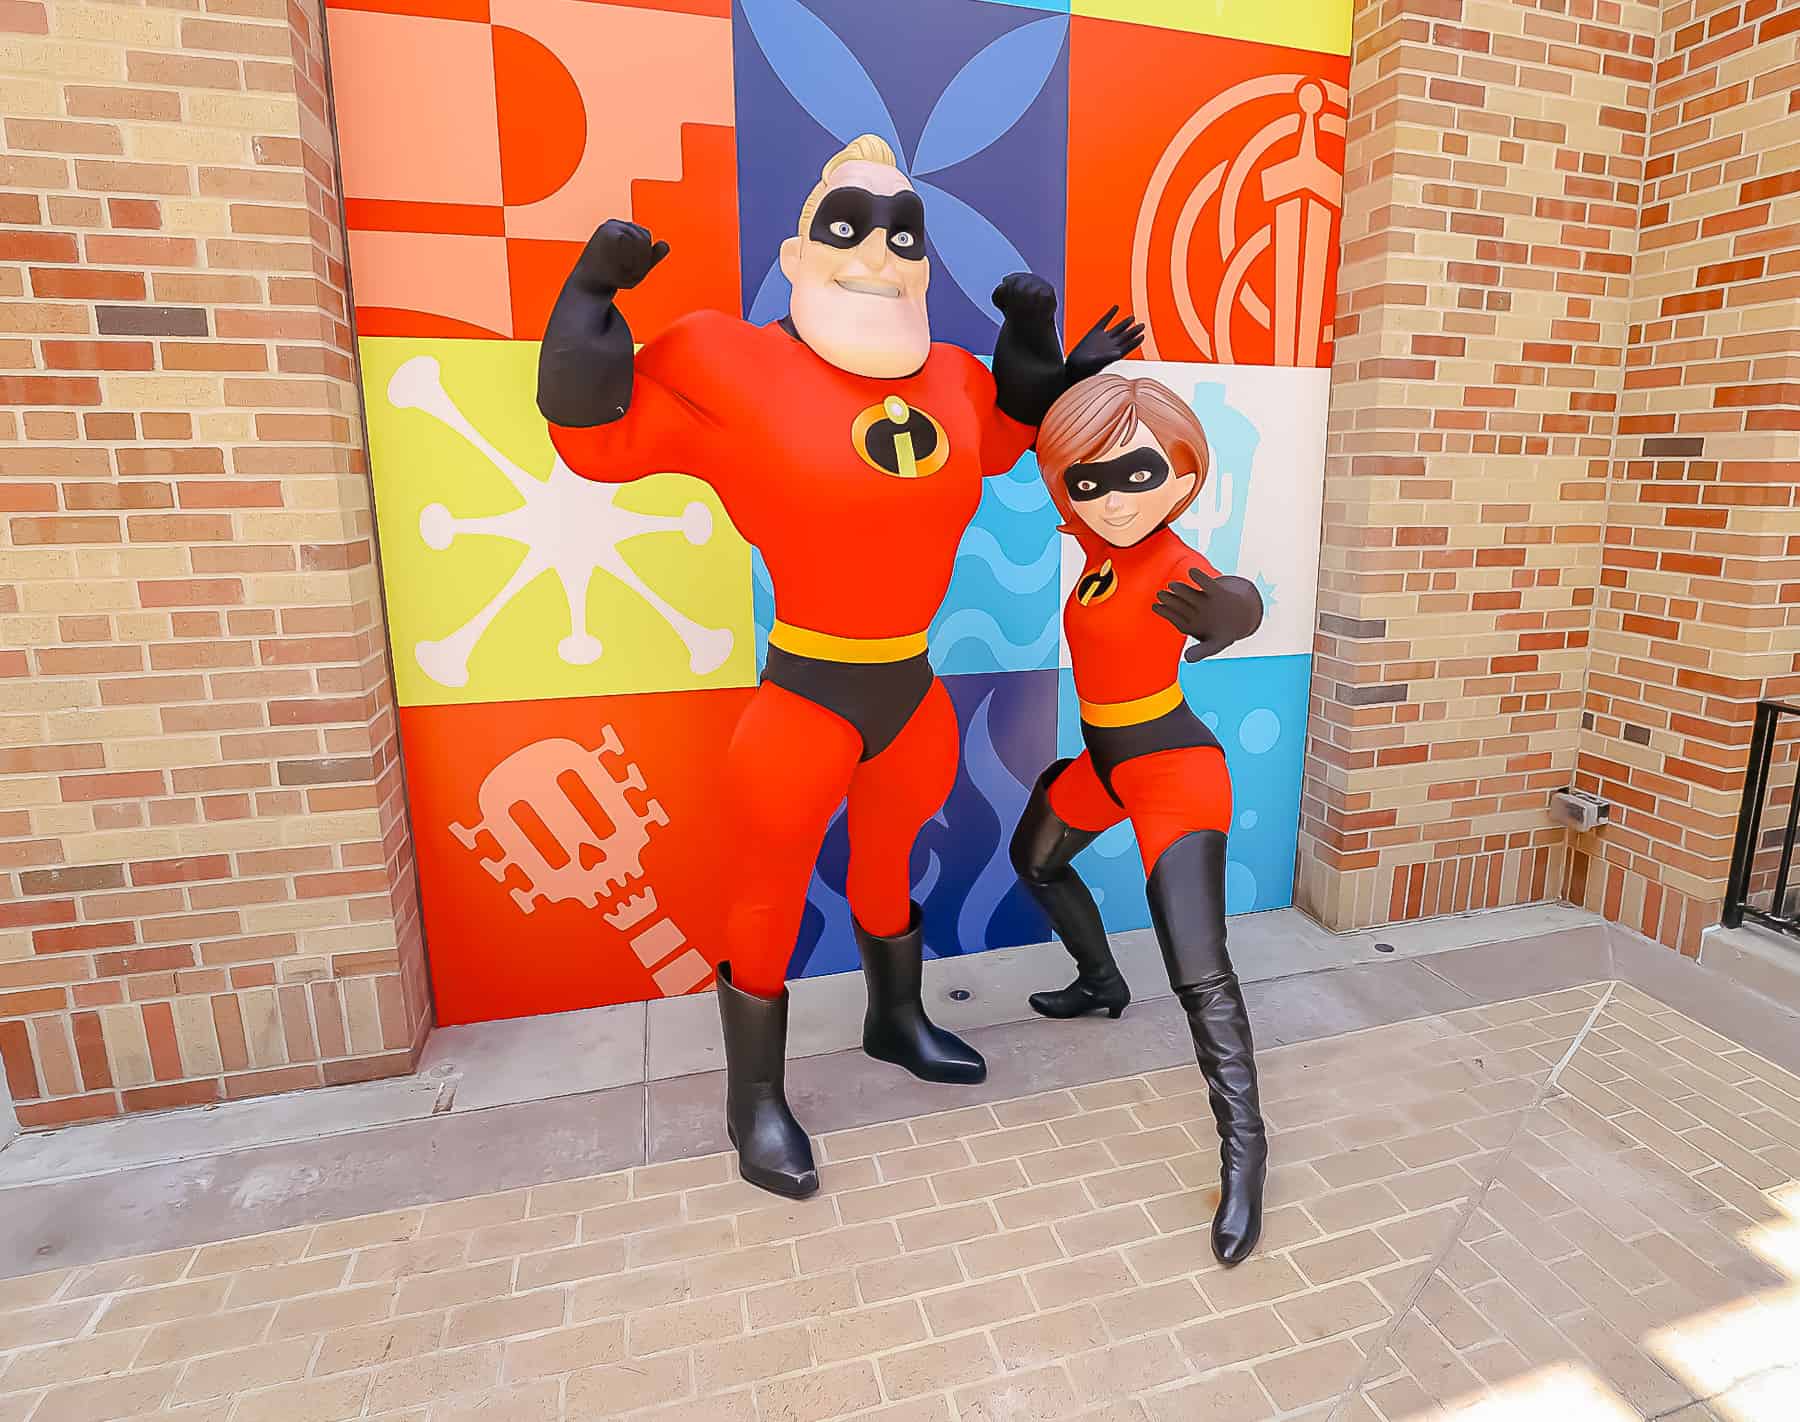 Mr.s and Mrs. Incredible posing like super heroes. 